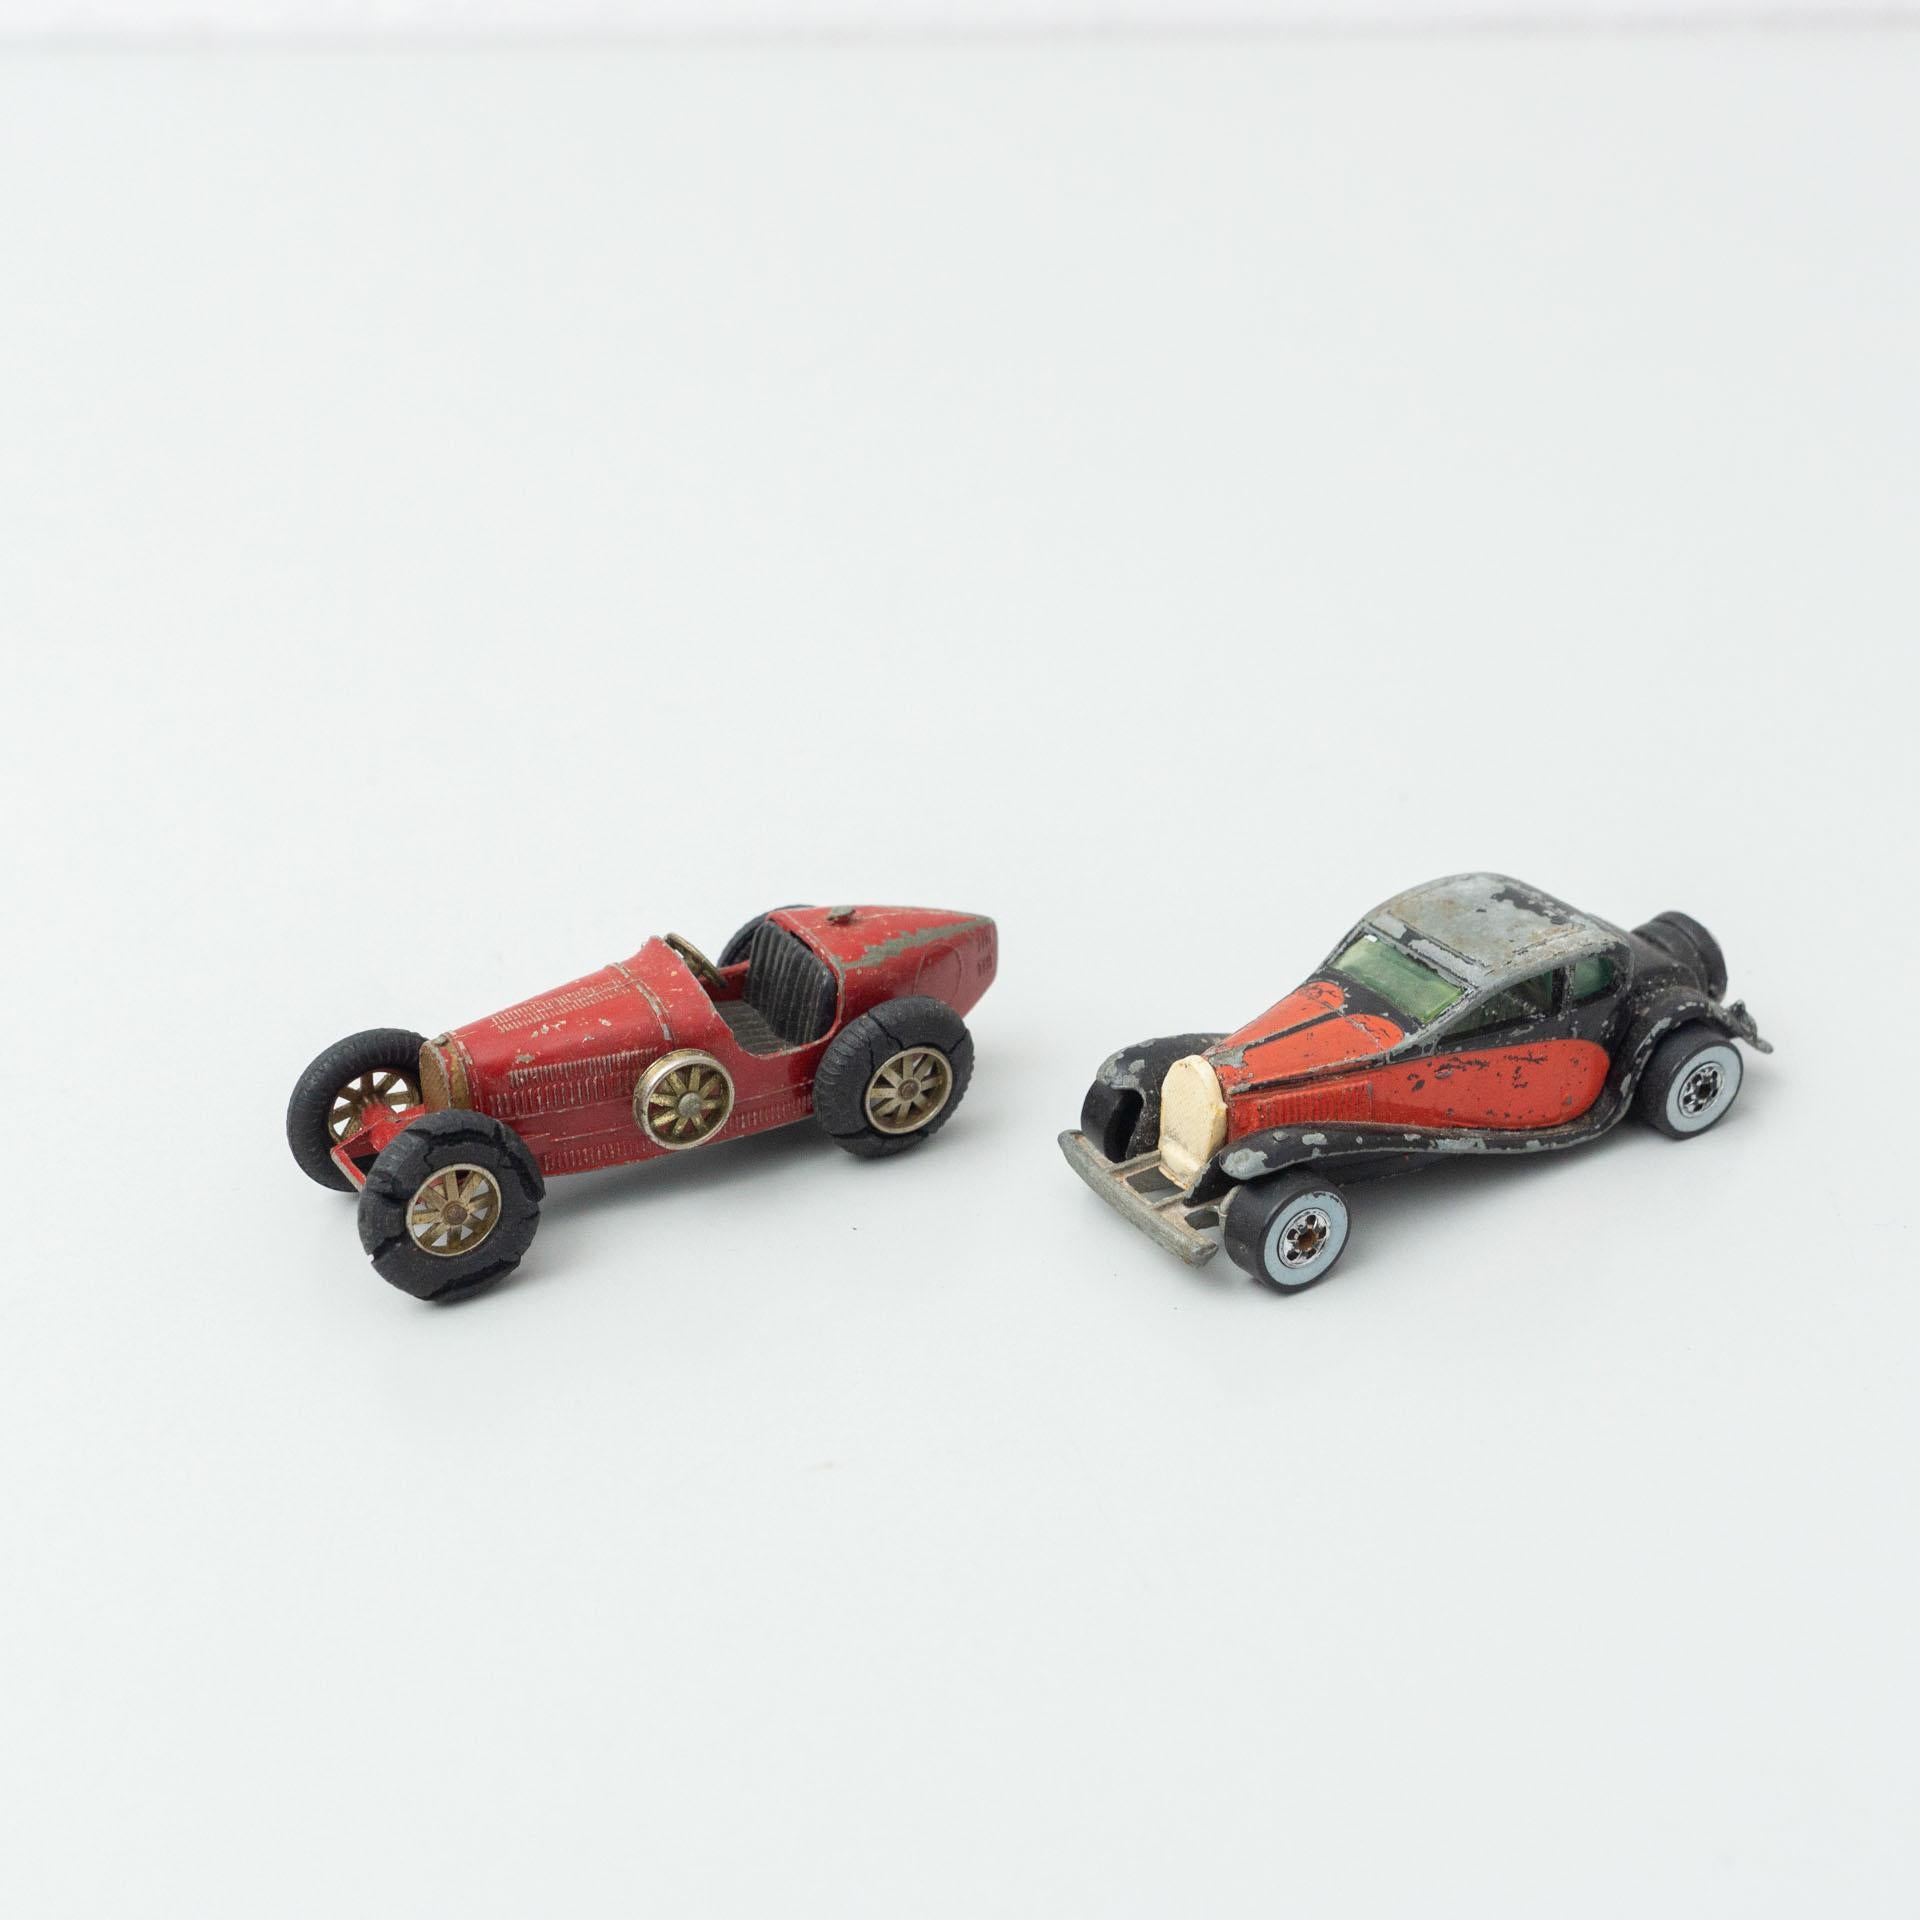 Set of two vintage Bugatti MatchBox car toys.
By MatchBox, circa 1960.

In original condition, with minor wear consistent with age and use, preserving a beautiful patina.

Materials:
Metal
Plastic

Dimensions (each one):
D 8 cm x W 3 cm x